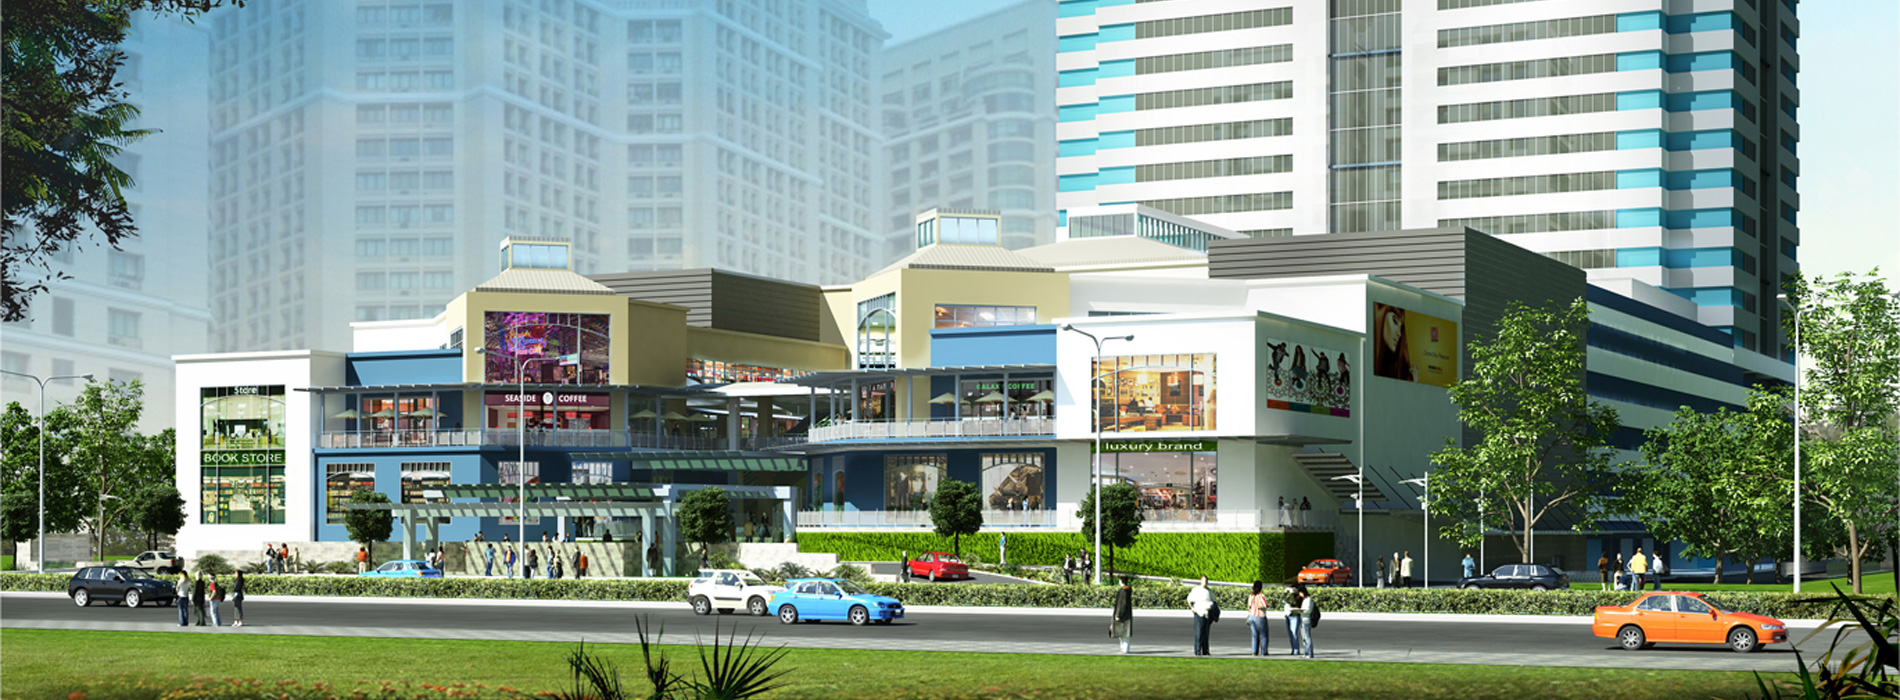 The 30th Mall and Corporate Center